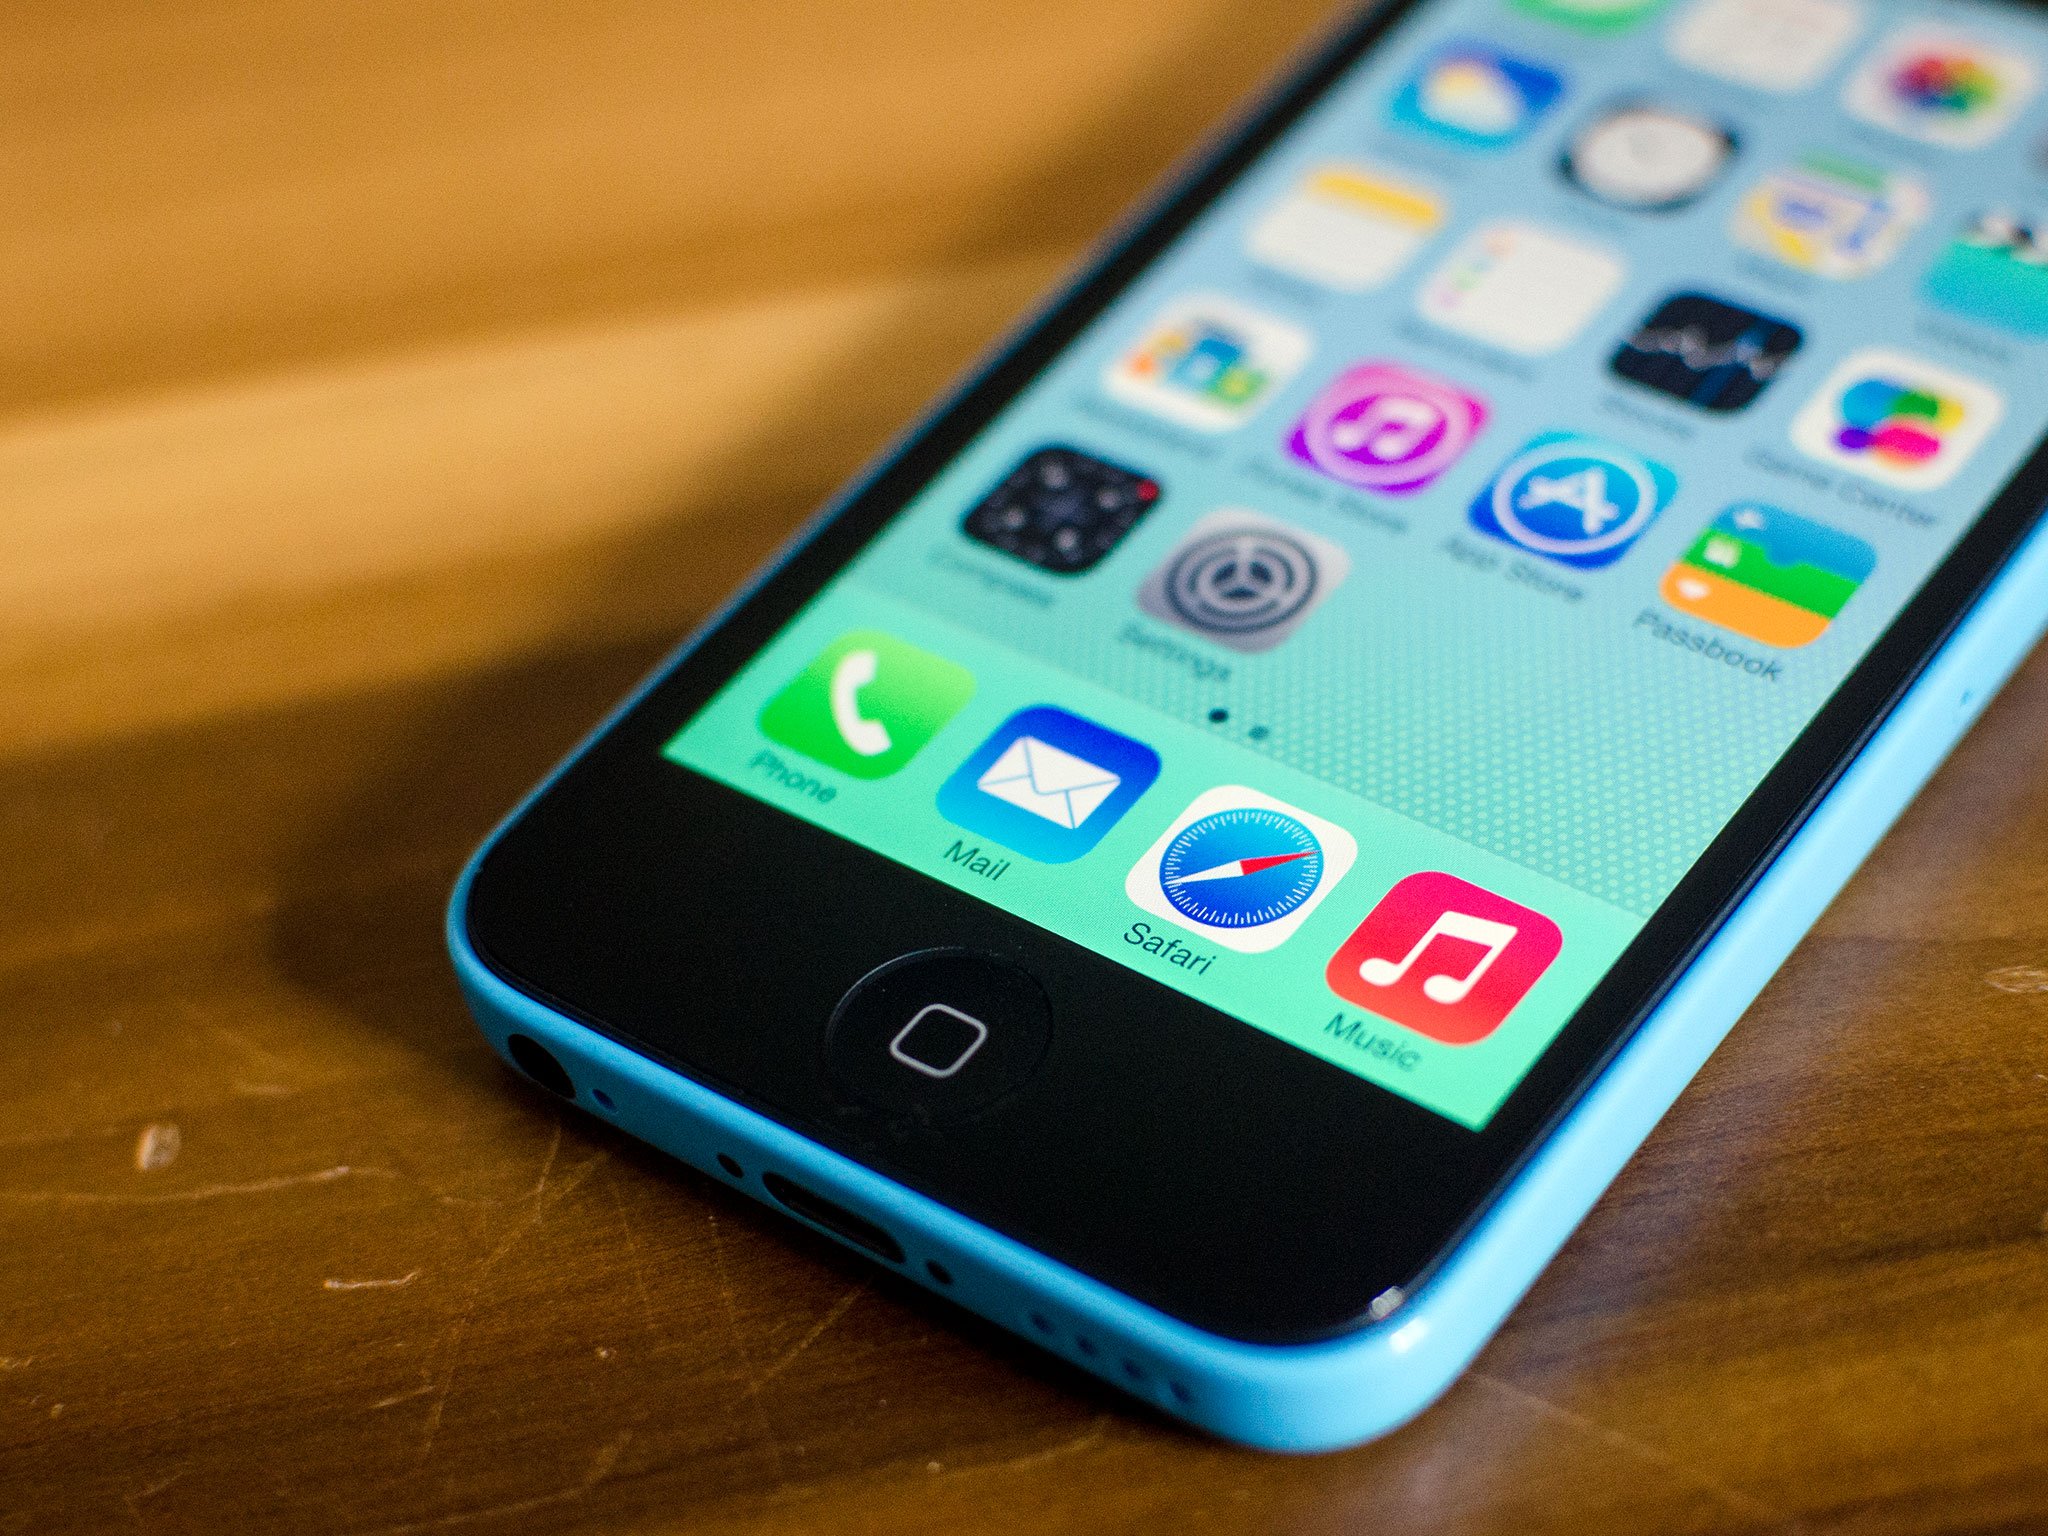 How to replace the Home button in an iPhone 5c